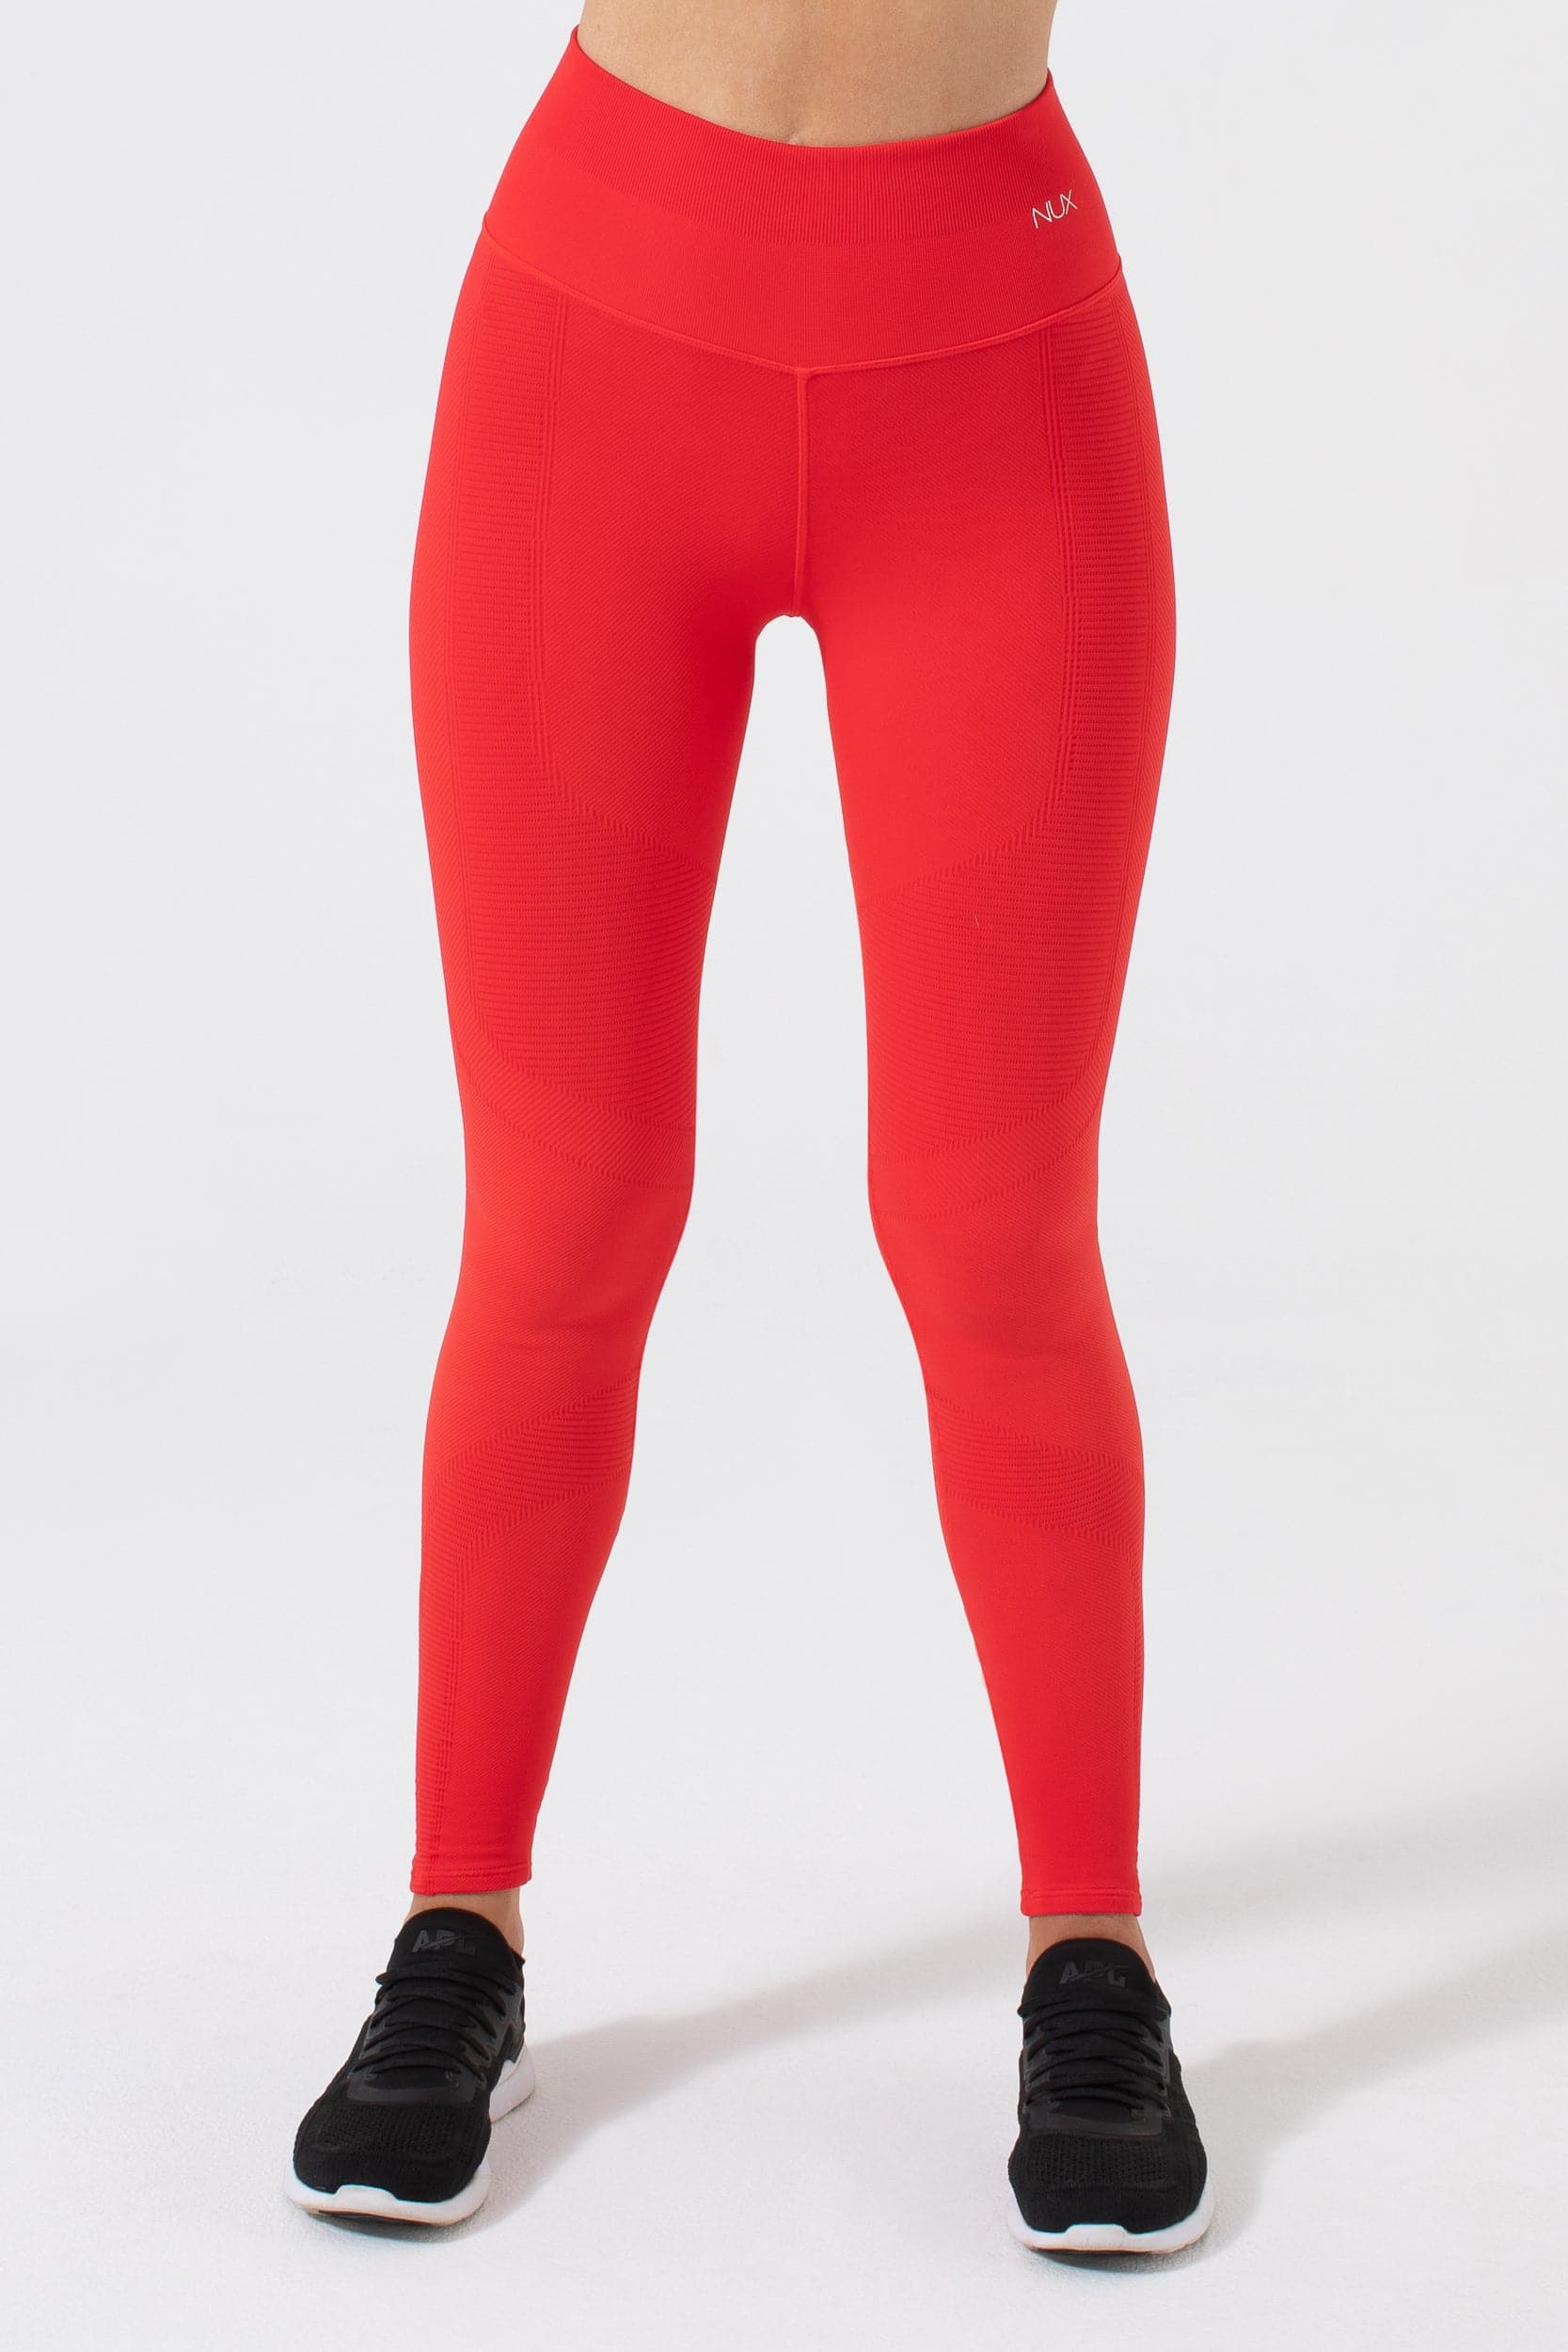 Nux All Net Legging Workout Leggings with Matching Products - Acenla